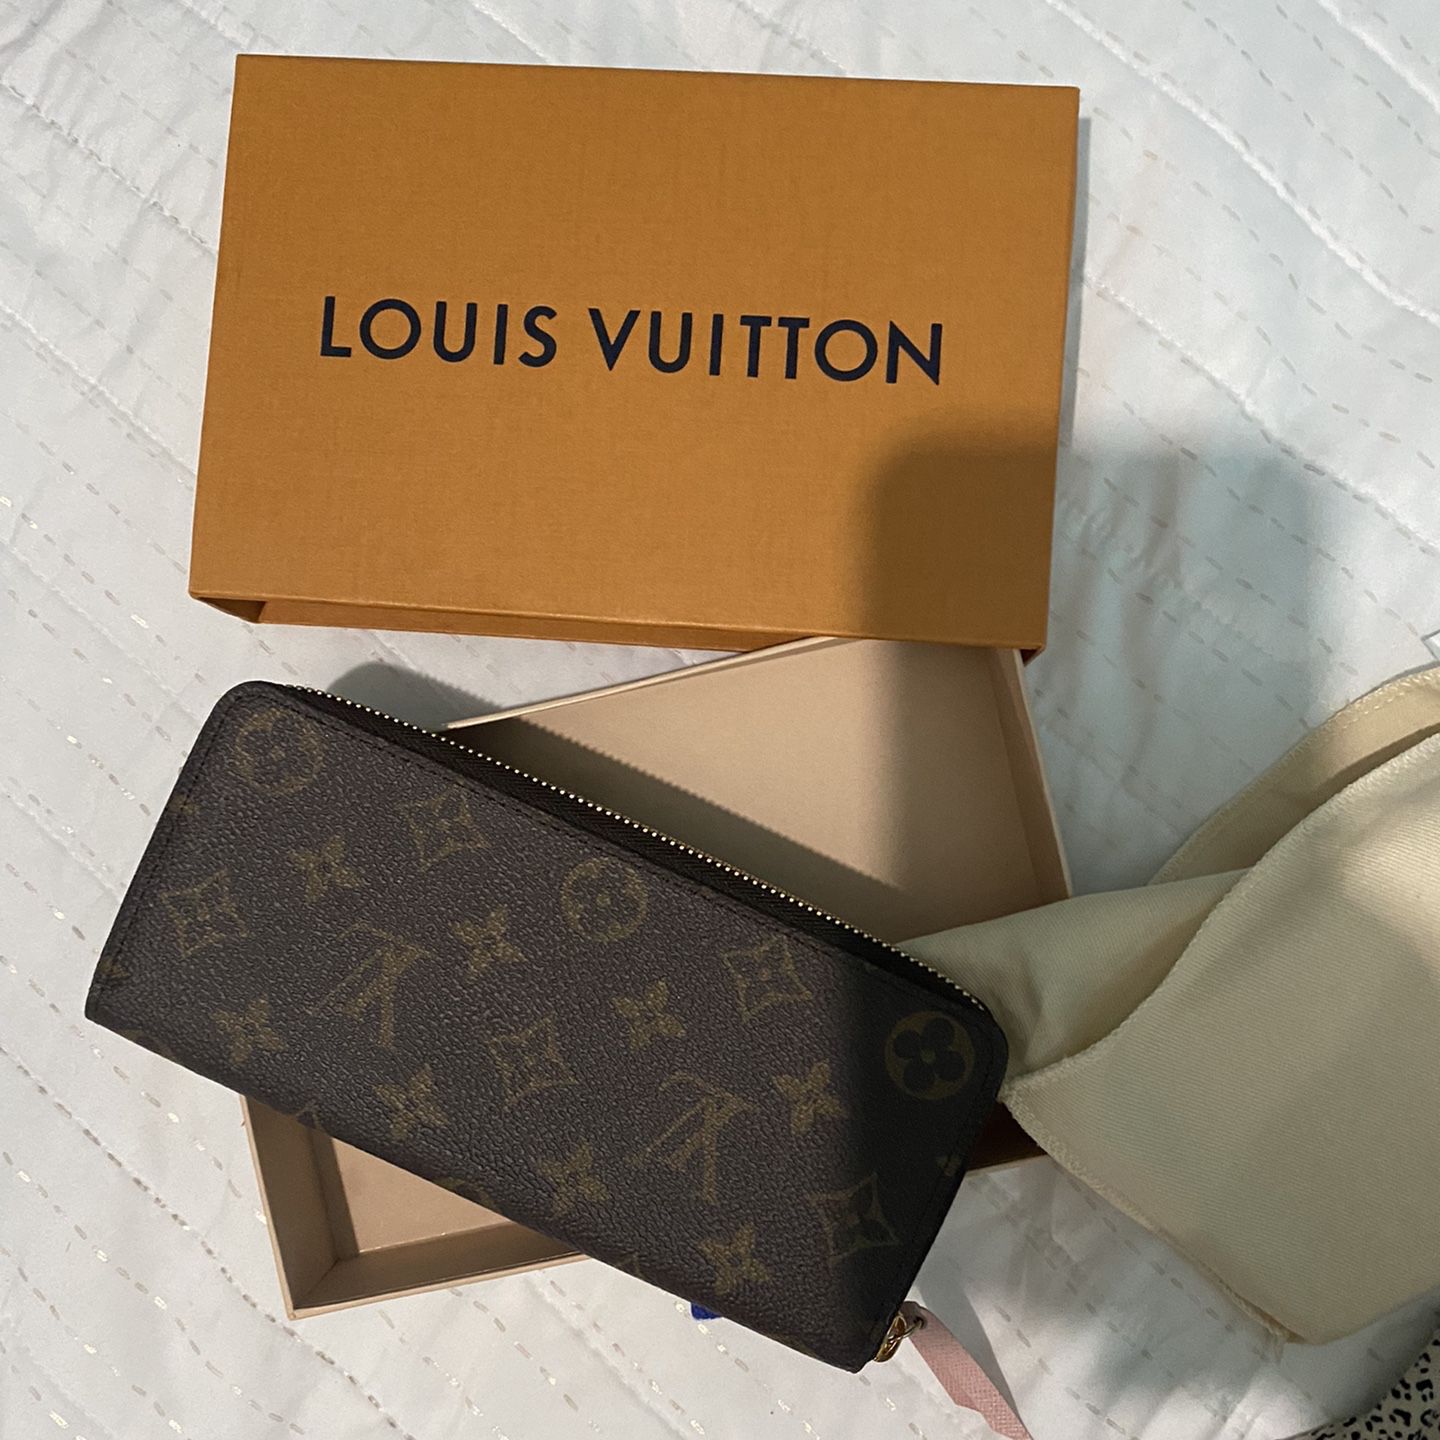 Designer Louis Vuitton Wallet New With Box for Sale in Columbia